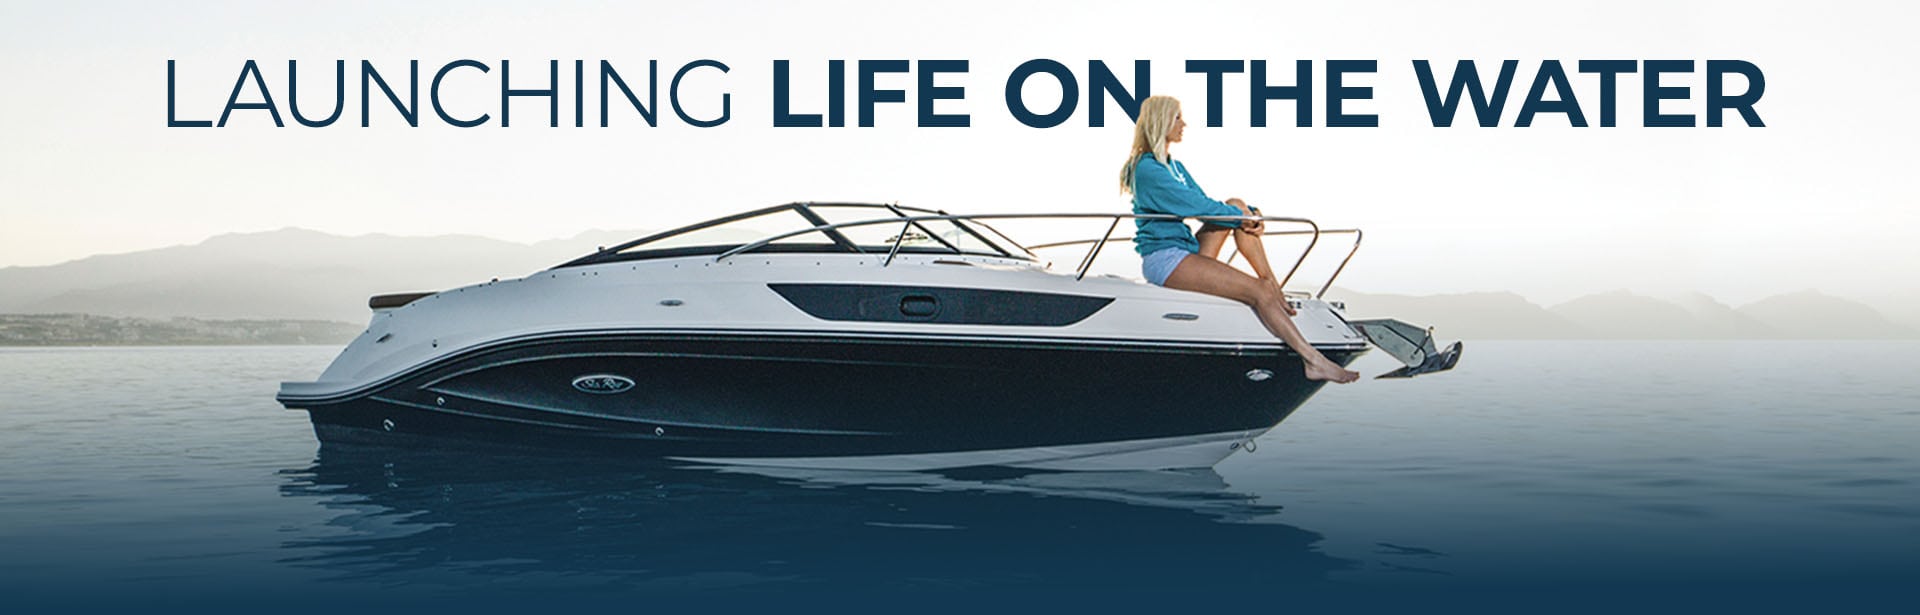 Launching Life on the Water - Up to 60% Off